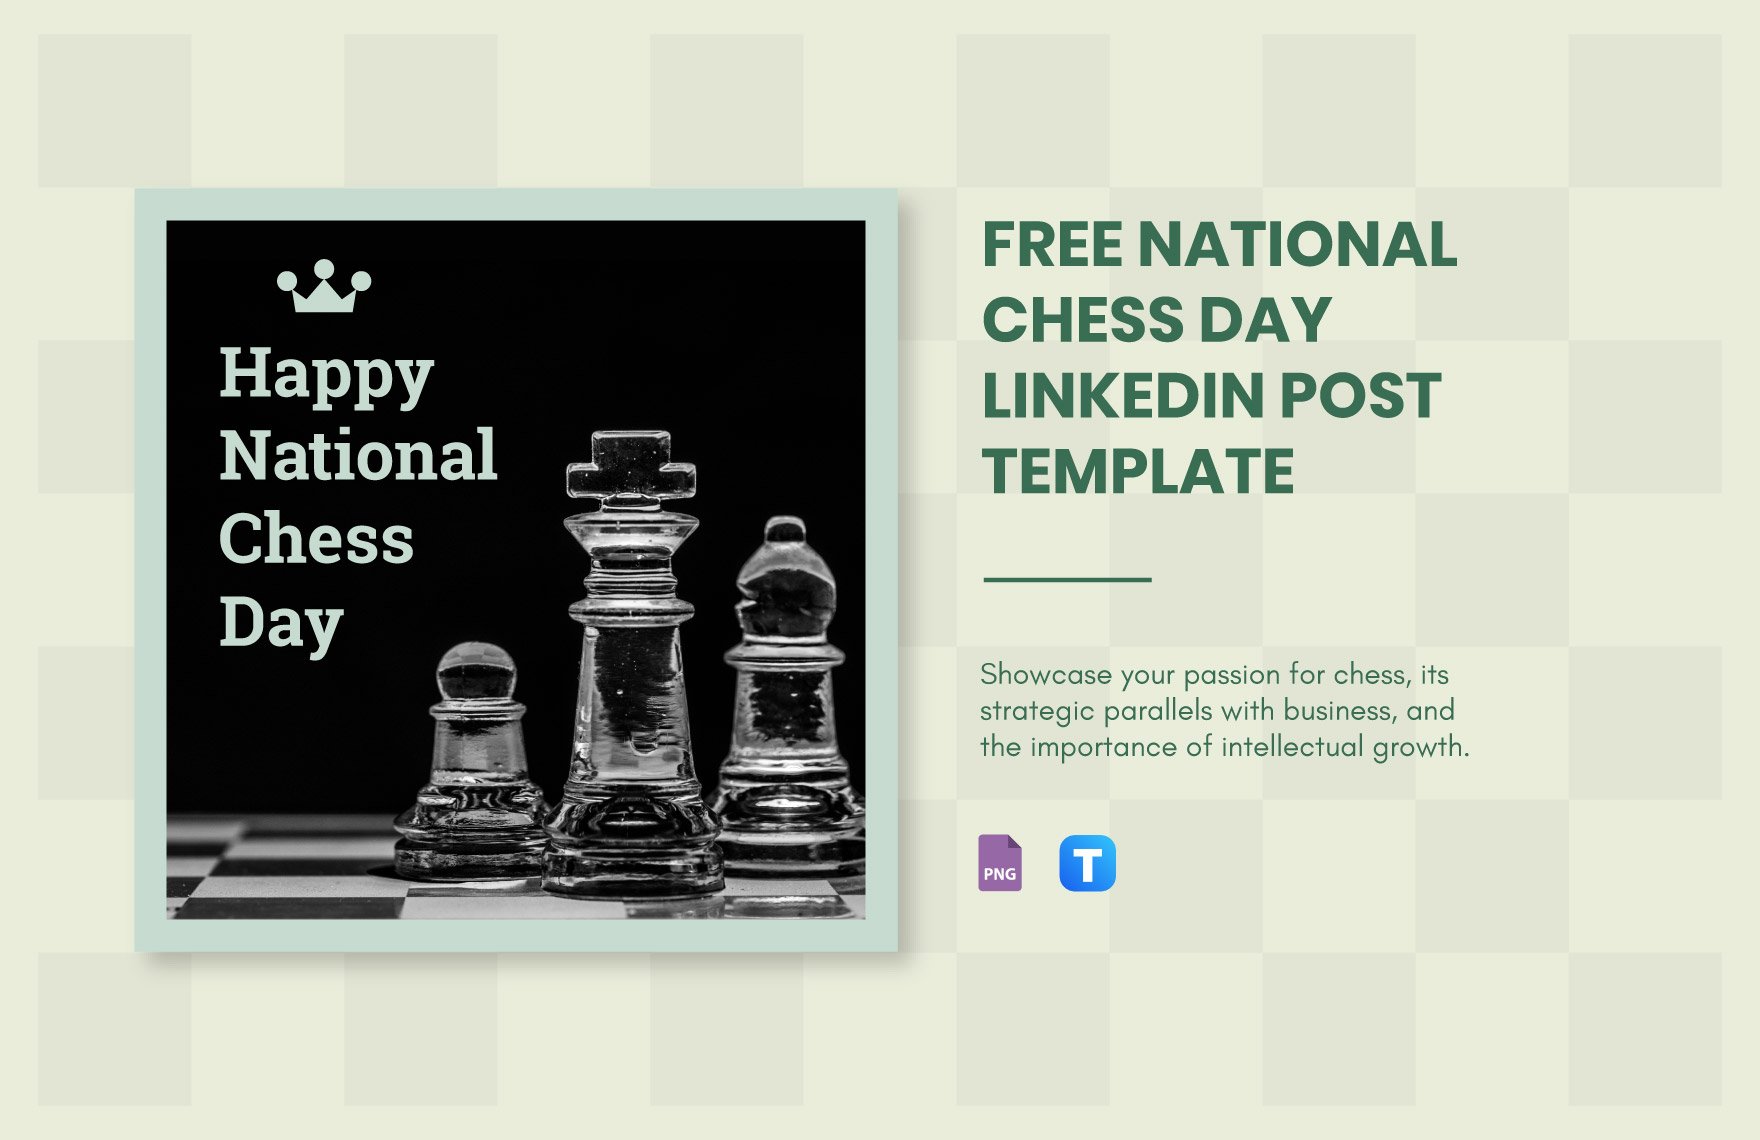 National Chess Day LinkedIn Post Template